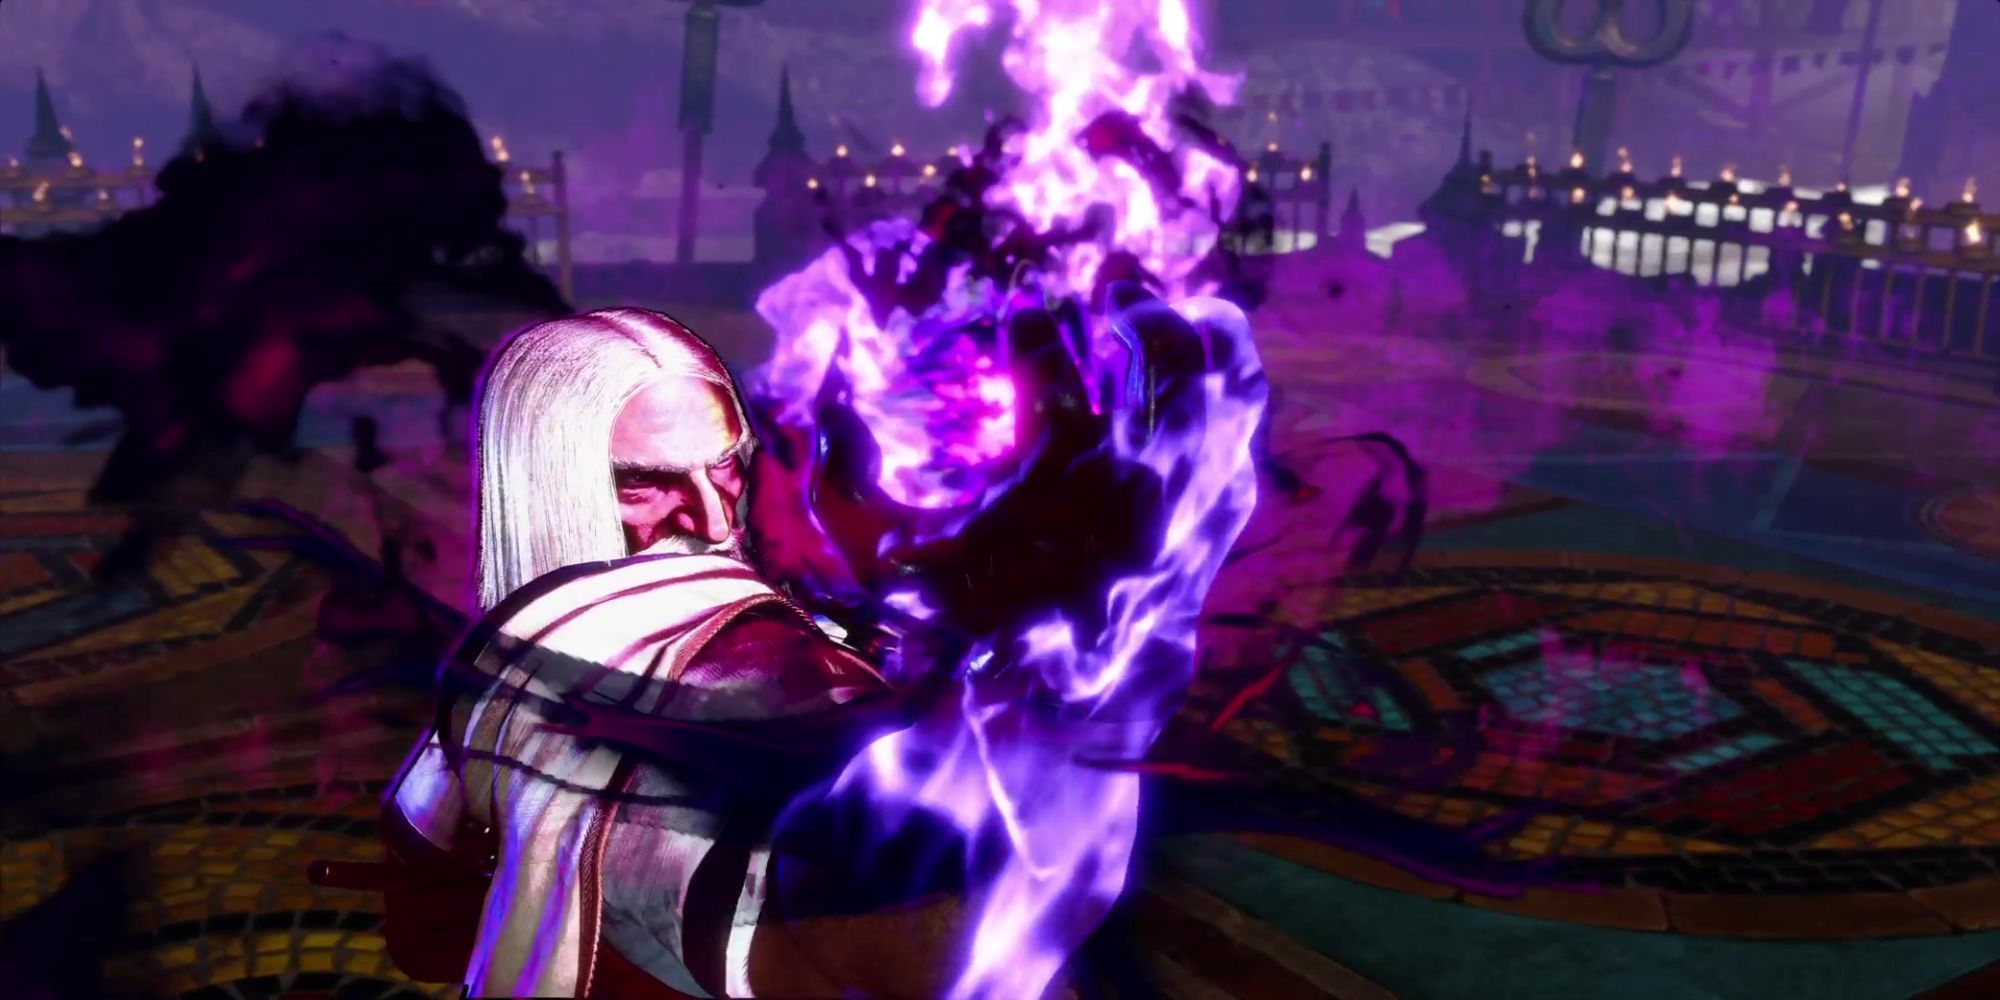 JP summons several Psycho Power clones with his Lovushka attack during a battle at Suval'hal Arena in Street Fighter 6.